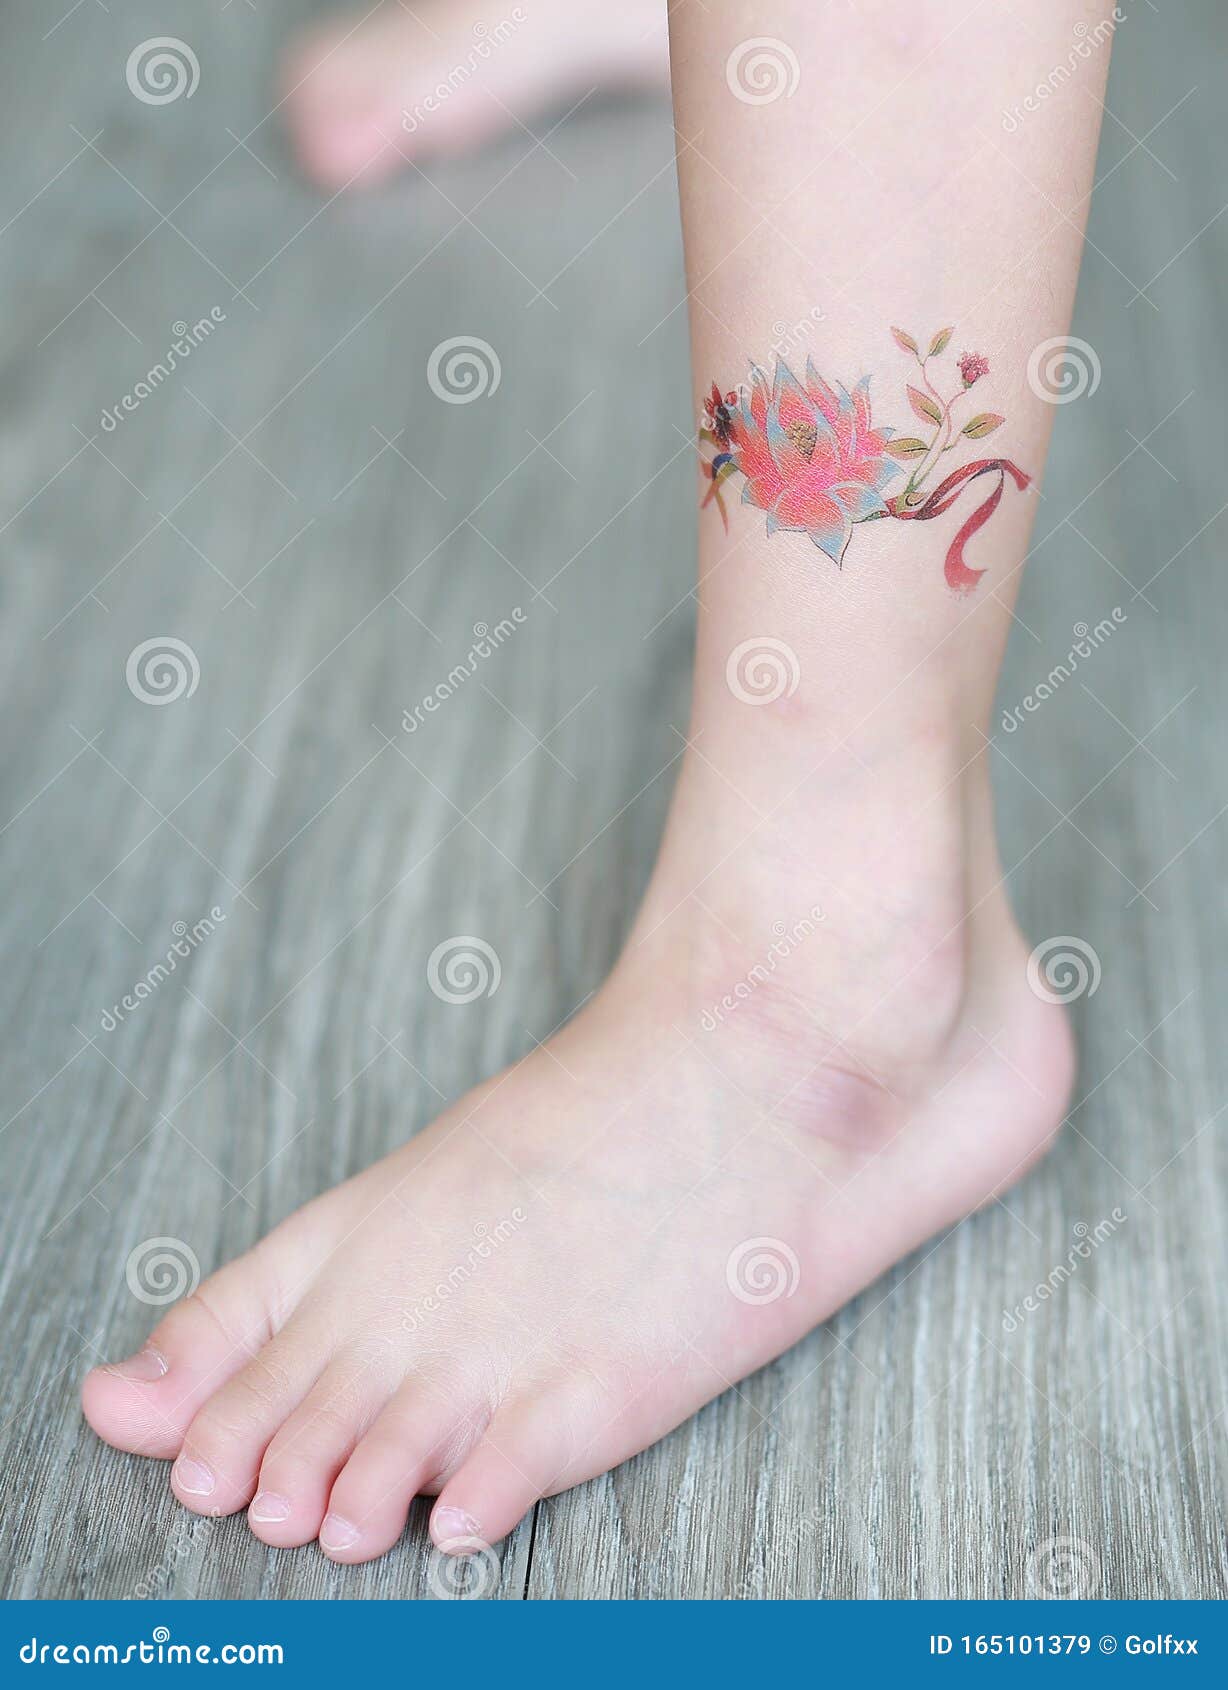 butterfly with flowers tattoos on leg